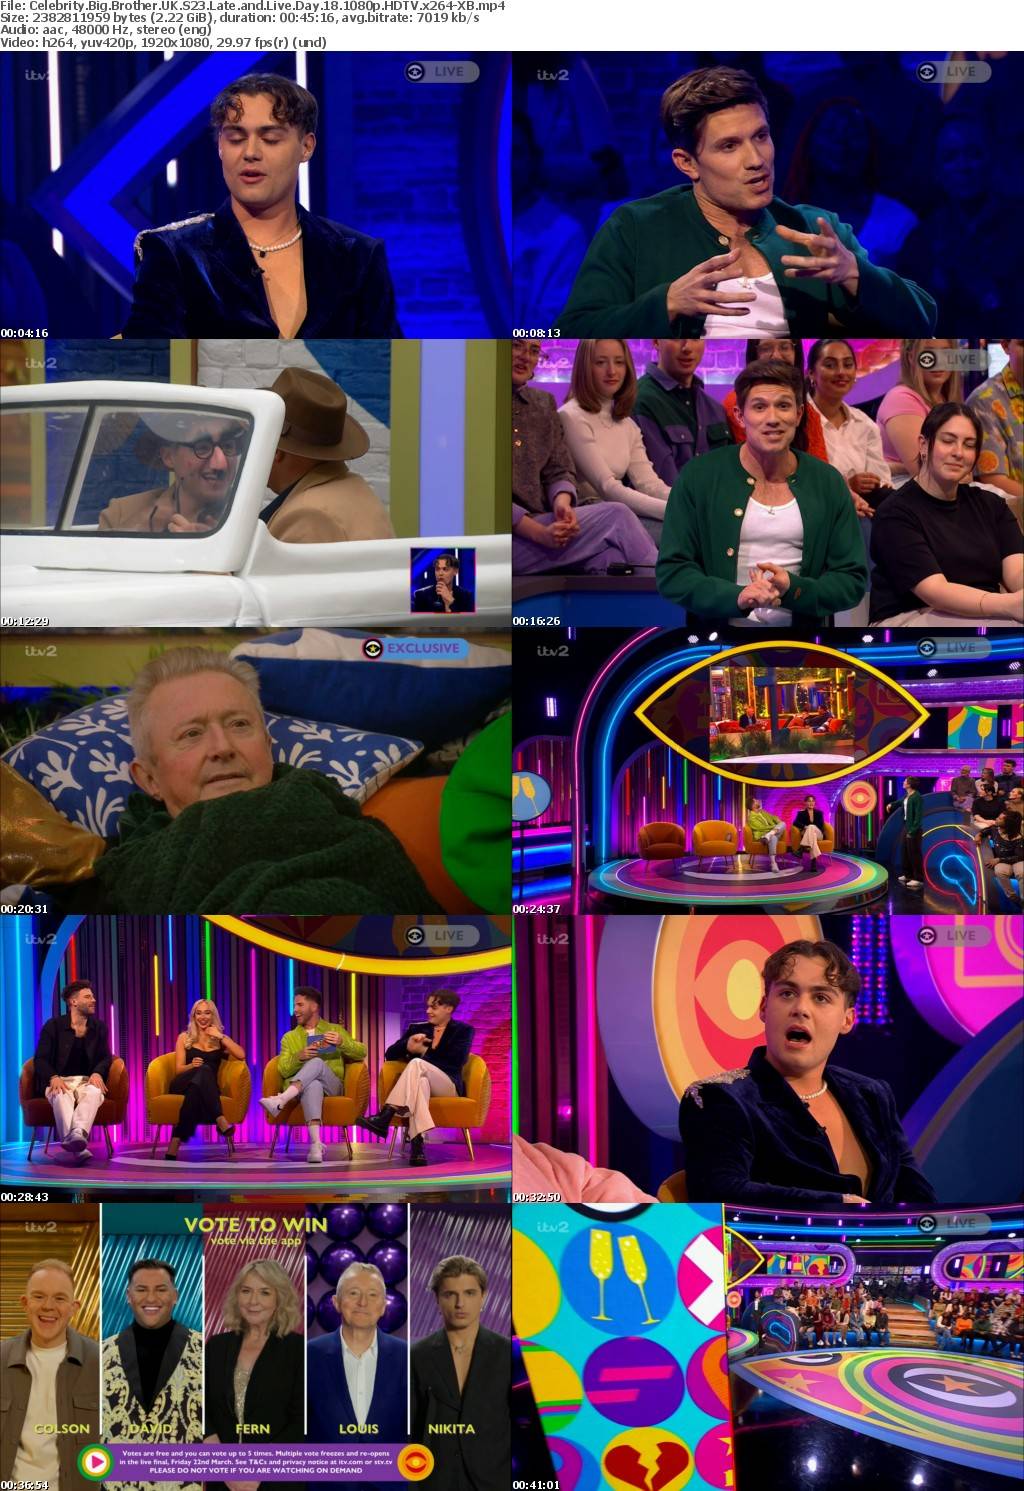 Celebrity Big Brother UK S23 Late and Live Day 18 1080p HDTV x264-XB